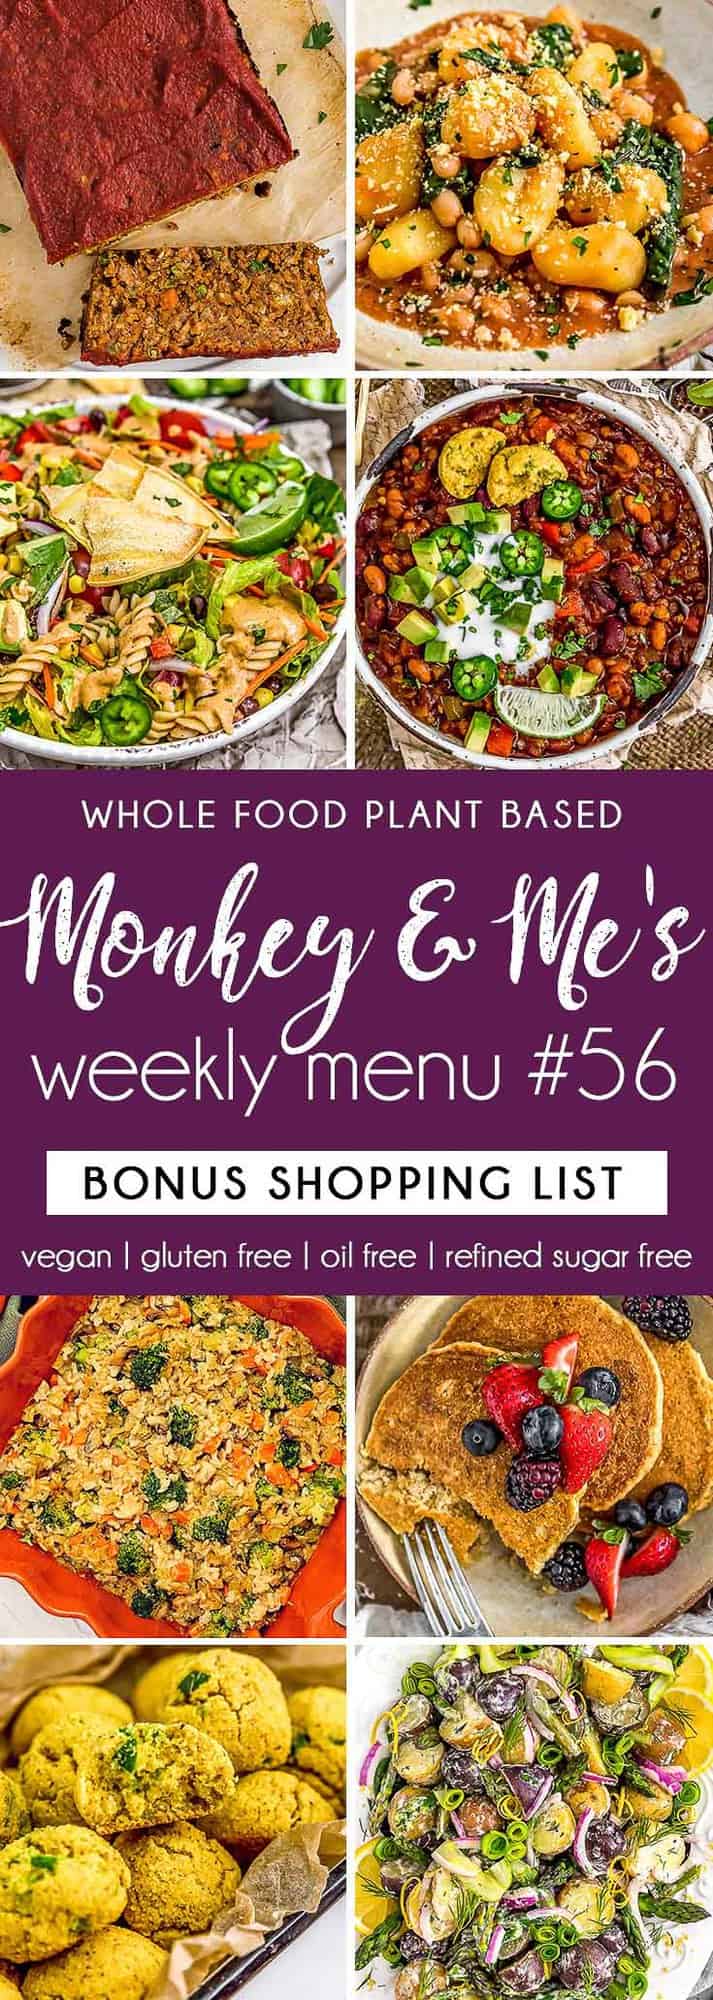 Monkey and Me's Menu 56 featuring 8 recipes